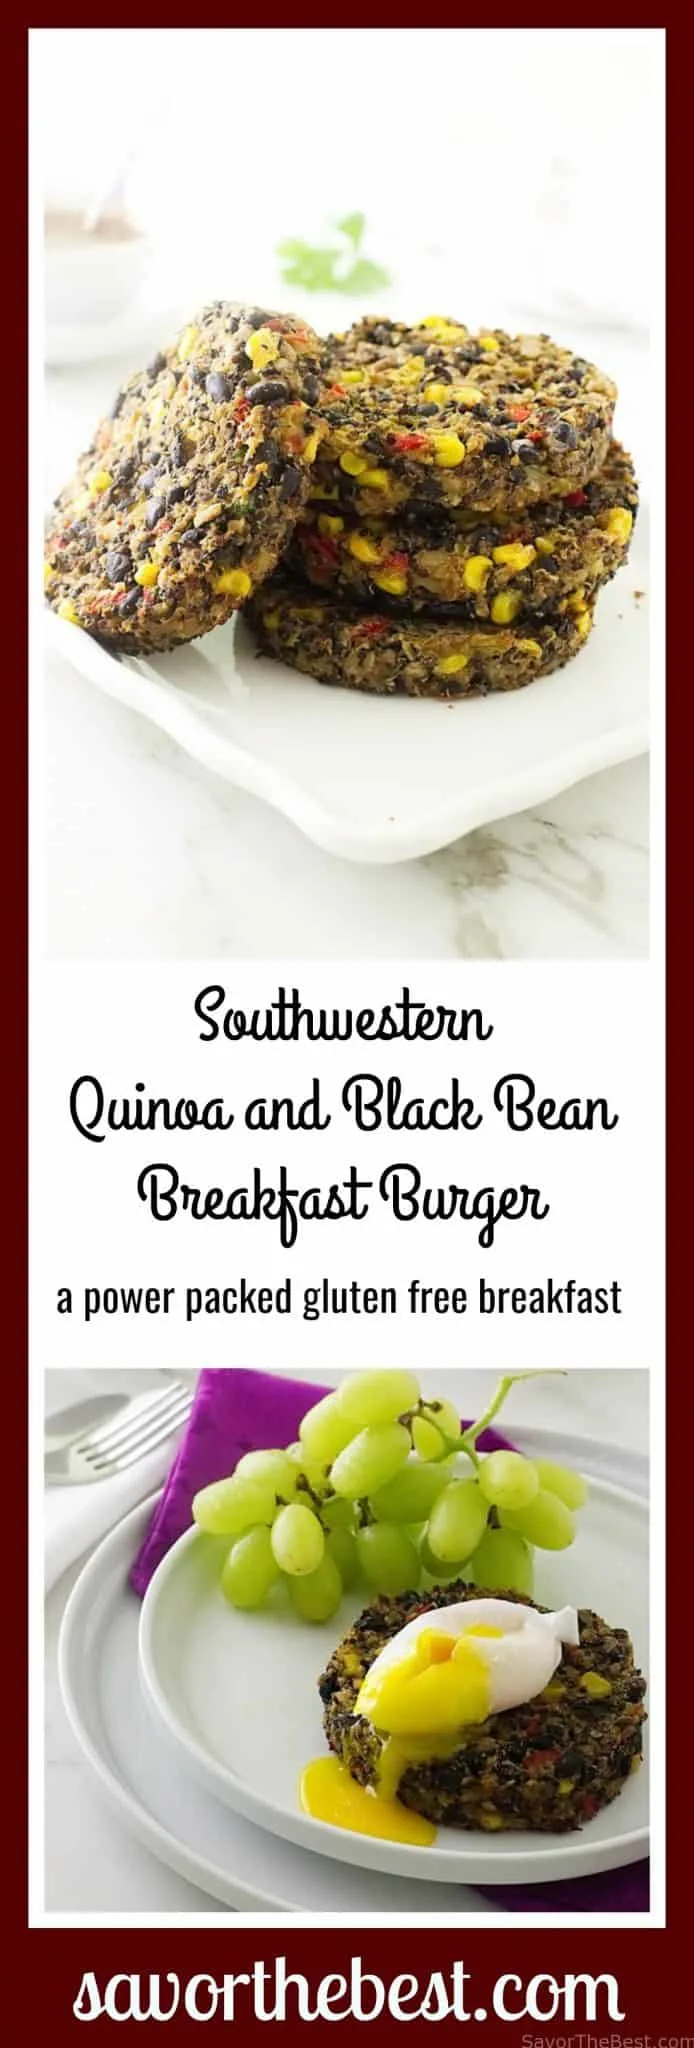 Southwestern Quinoa-Black Bean Breakfast Burger Recipe. A #glutenfree and #vegetarian breakfast. These black bean burgers are easy and quick to make.